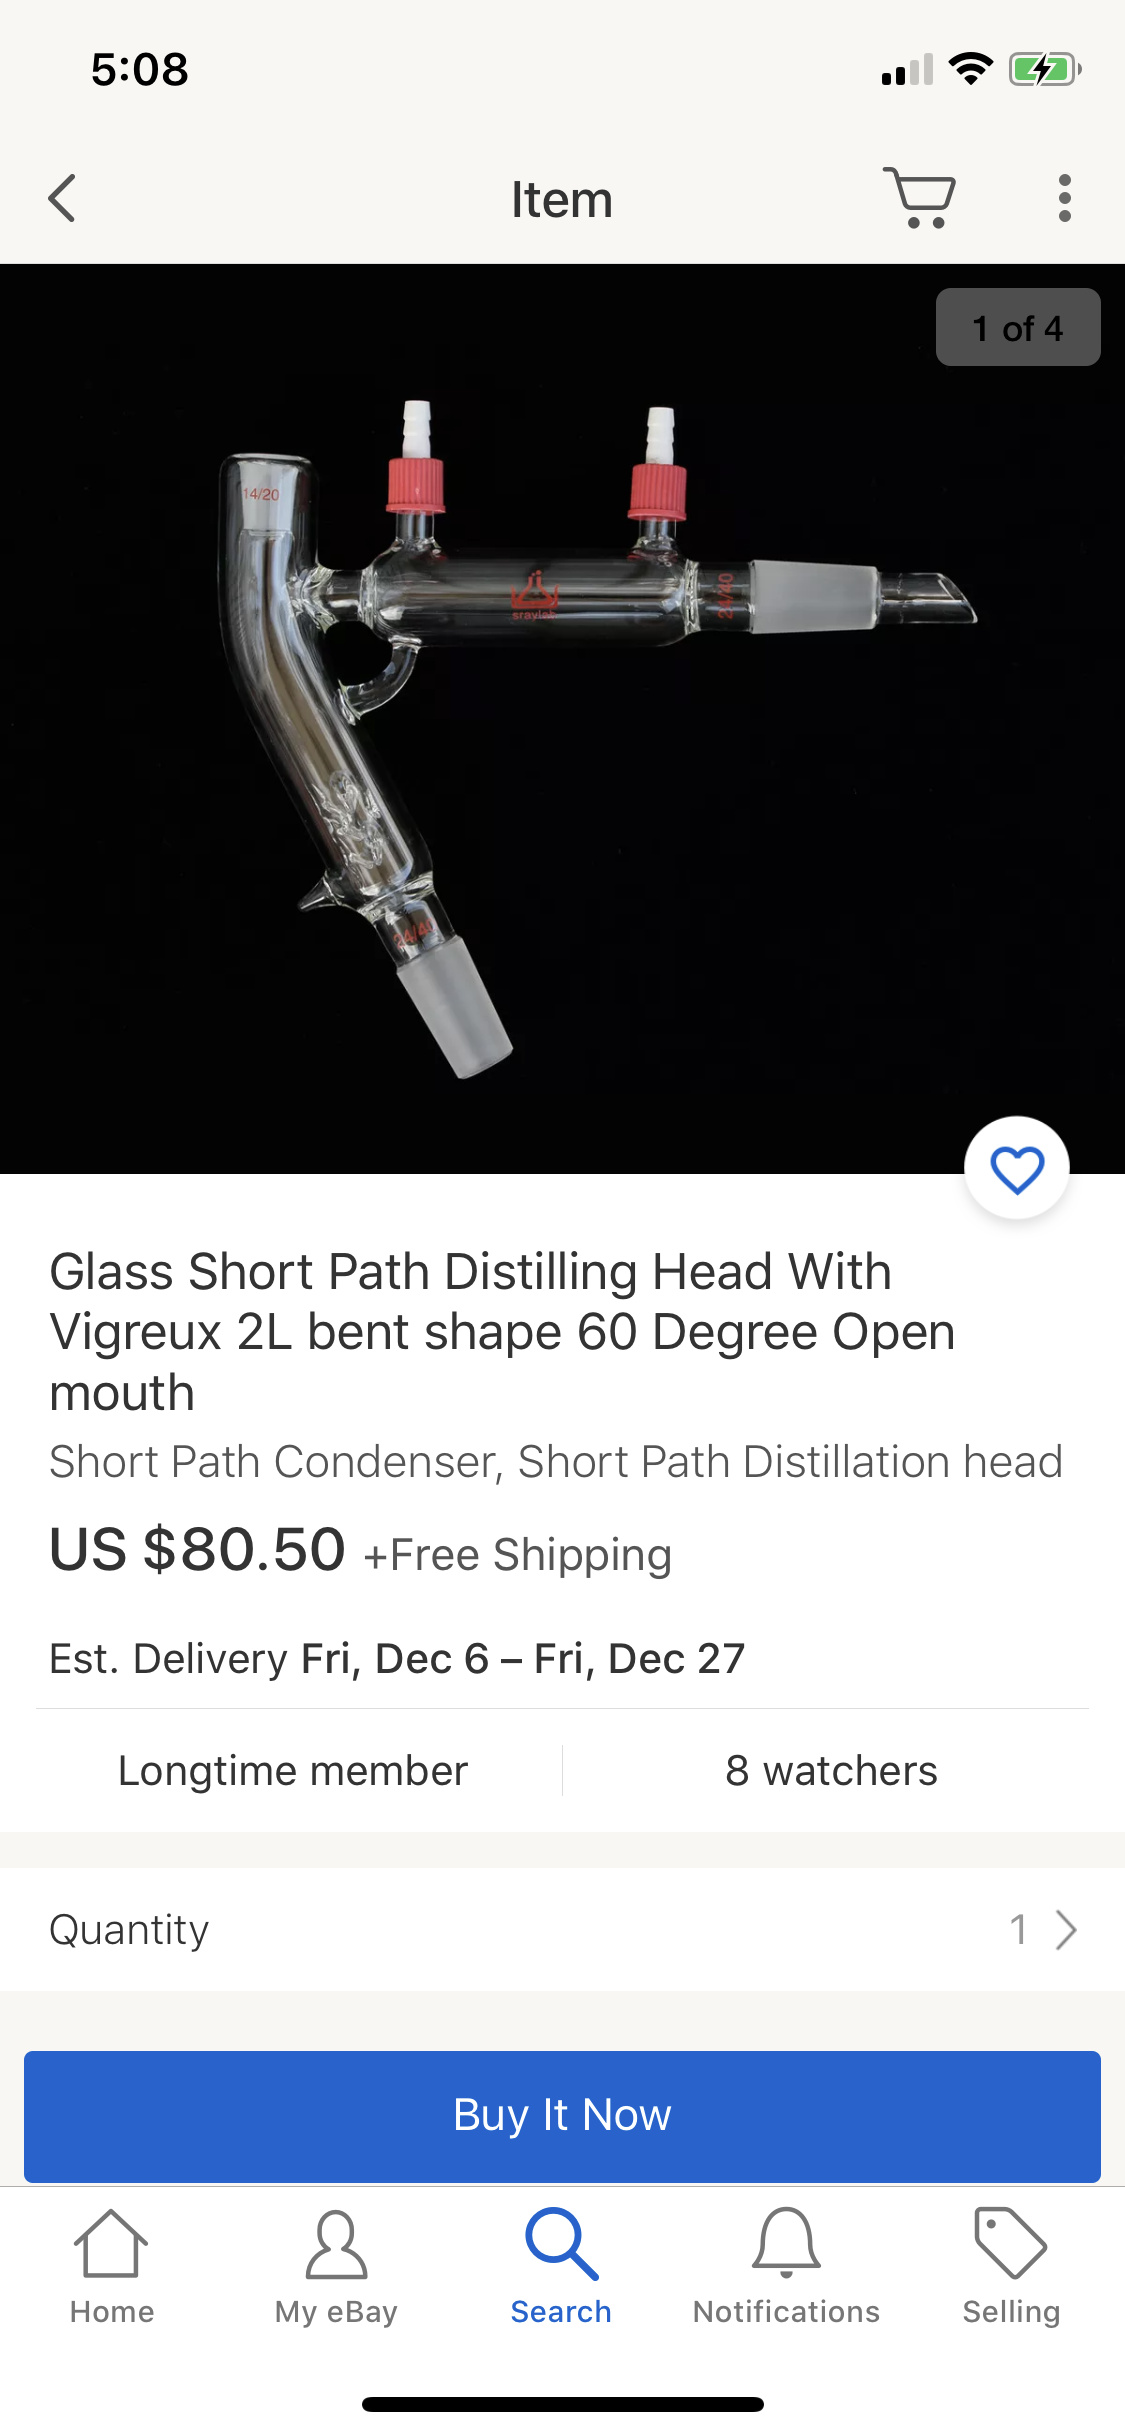 Glass Short Path Distillation Head 2L with Vigreux 60 Degree Open Mouth